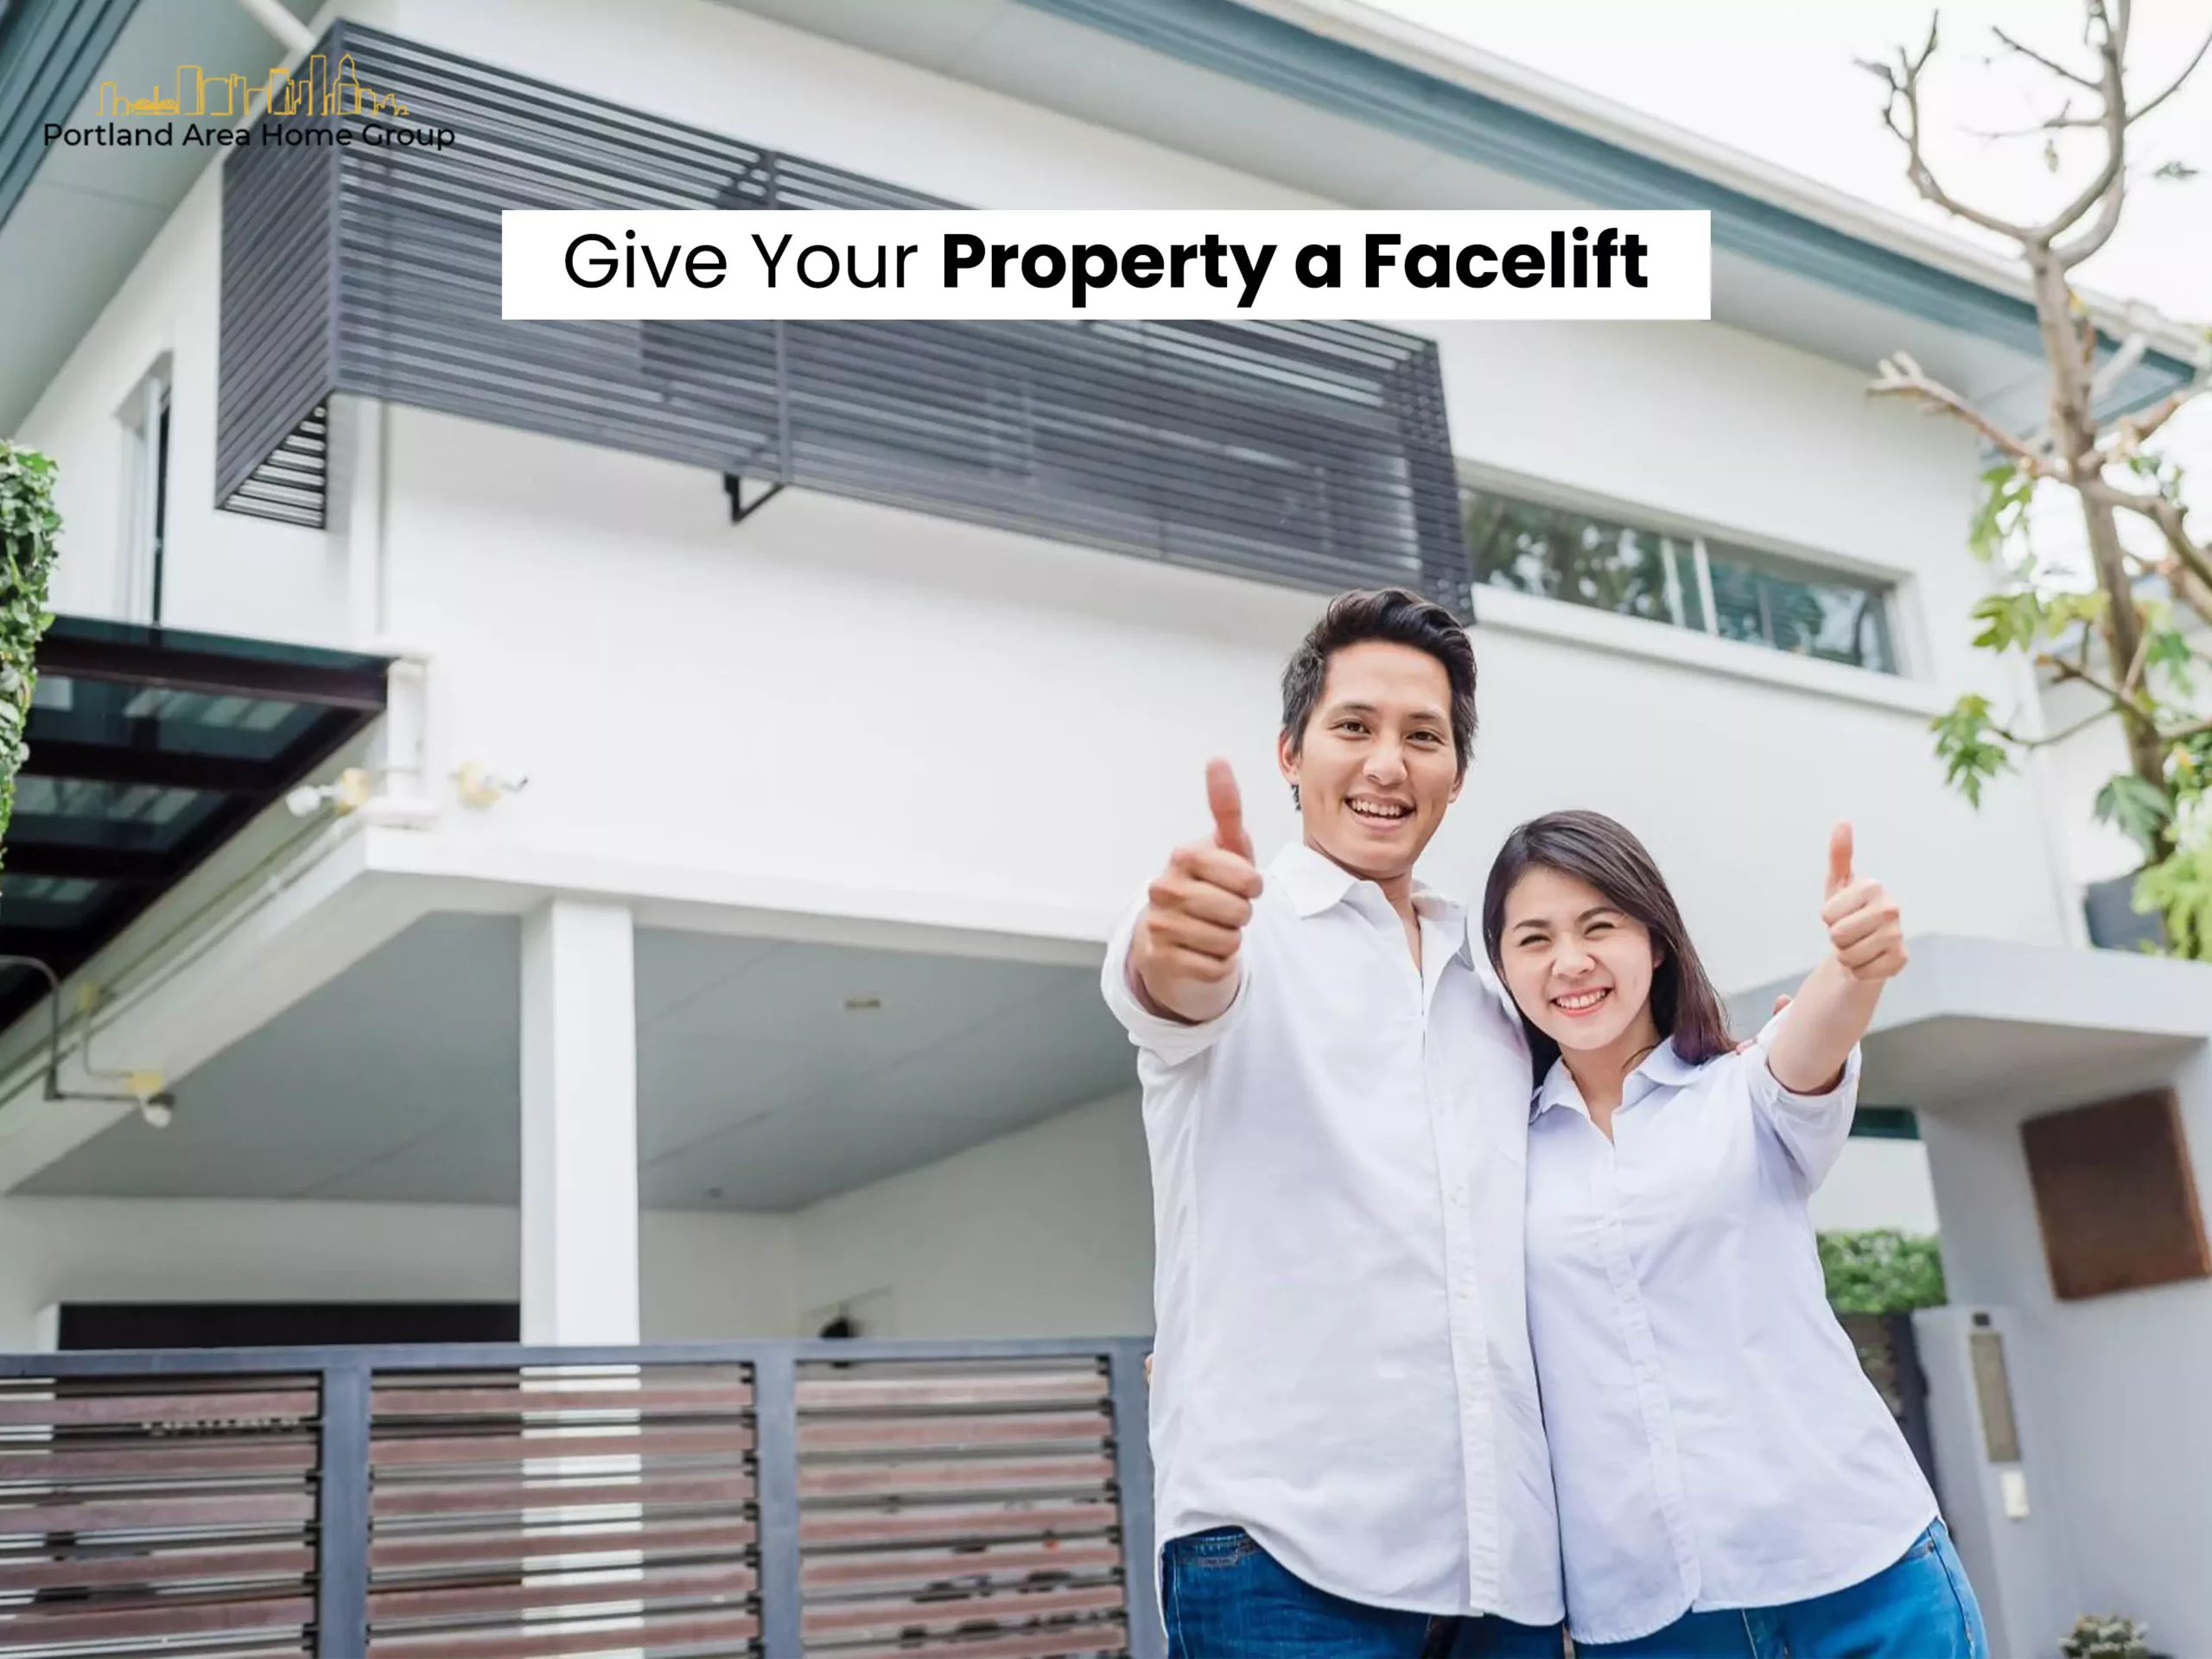 Give Your Property a Facelift